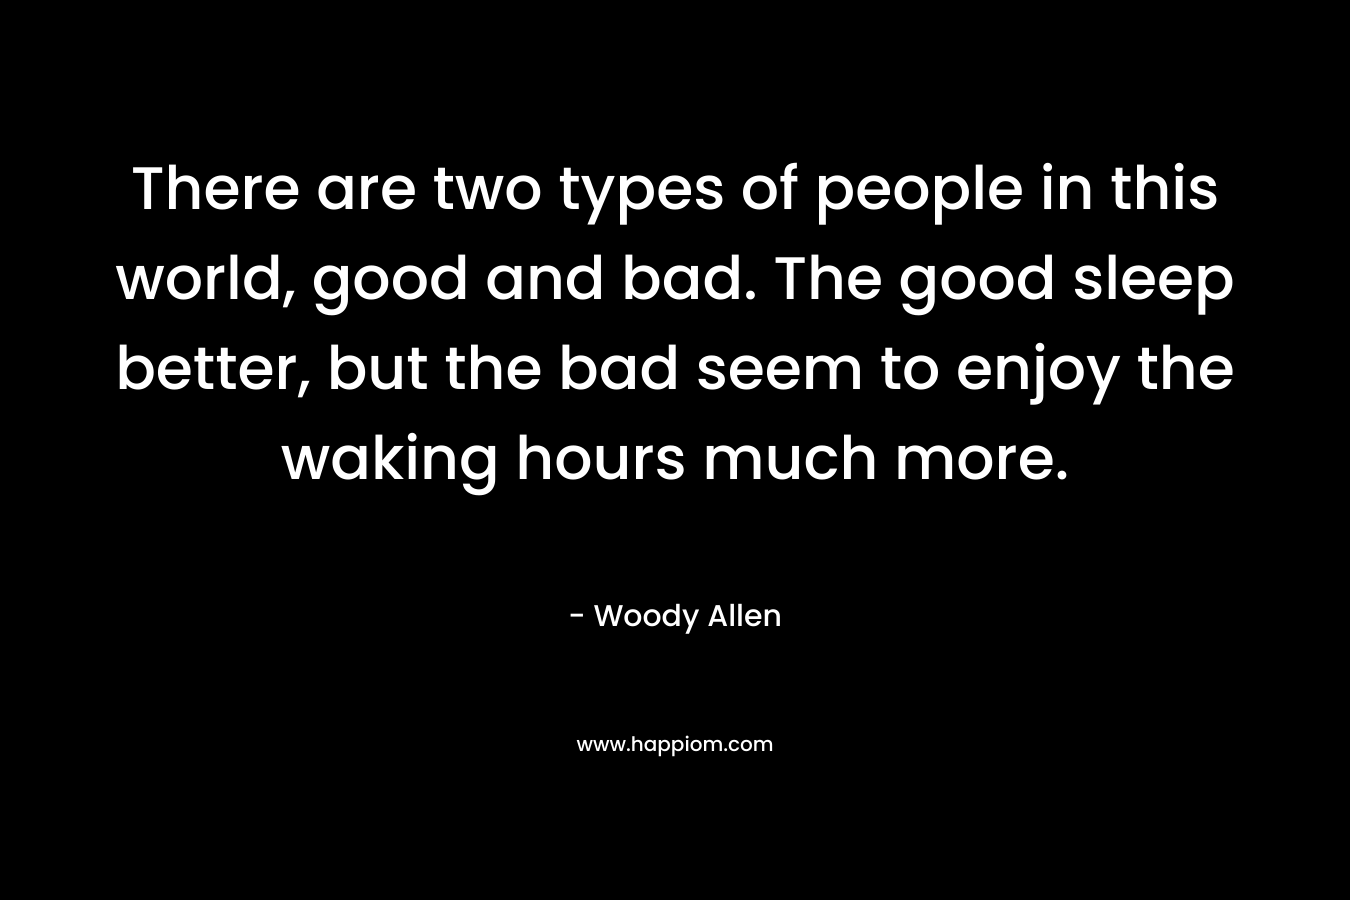 There are two types of people in this world, good and bad. The good sleep better, but the bad seem to enjoy the waking hours much more. – Woody Allen